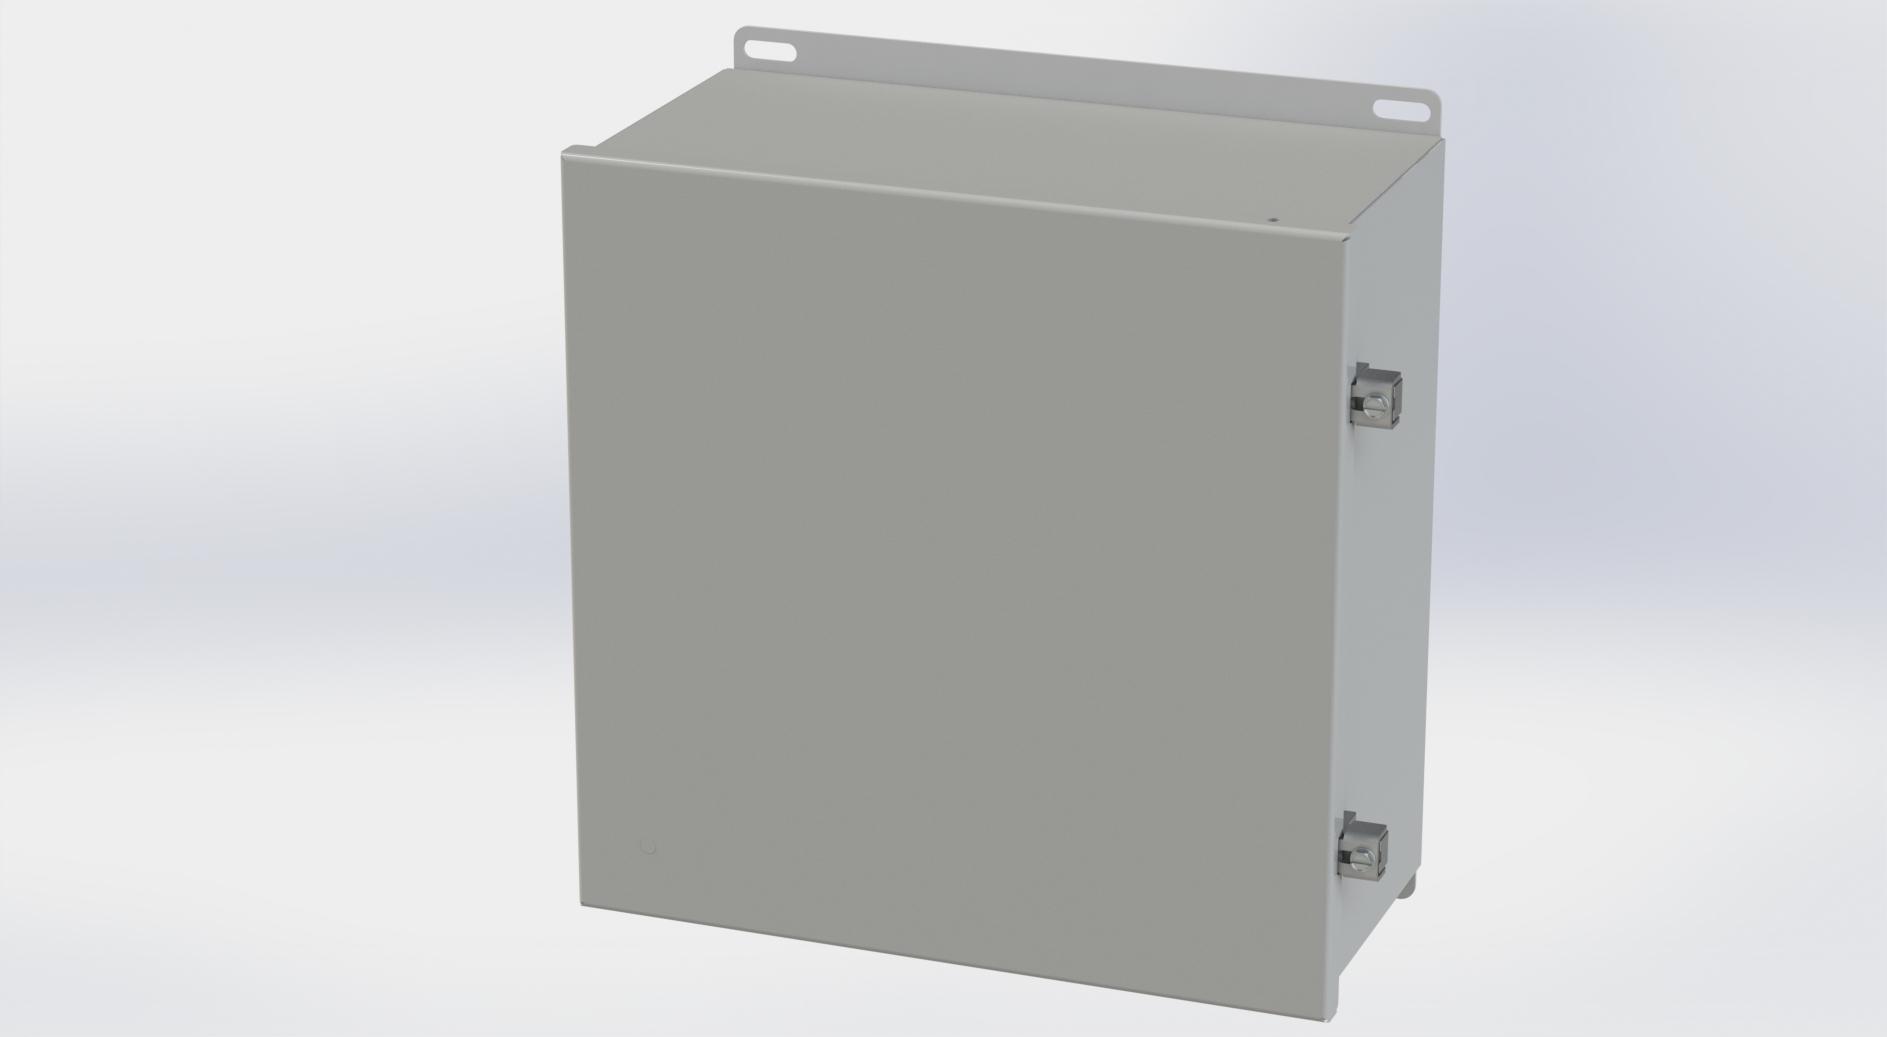 Saginaw Control SCE-1212CHNF CHNF Enclosure, Height:12.13", Width:12.00", Depth:6.00", ANSI-61 gray powder coating inside and out. Optional sub-panels are powder coated white.